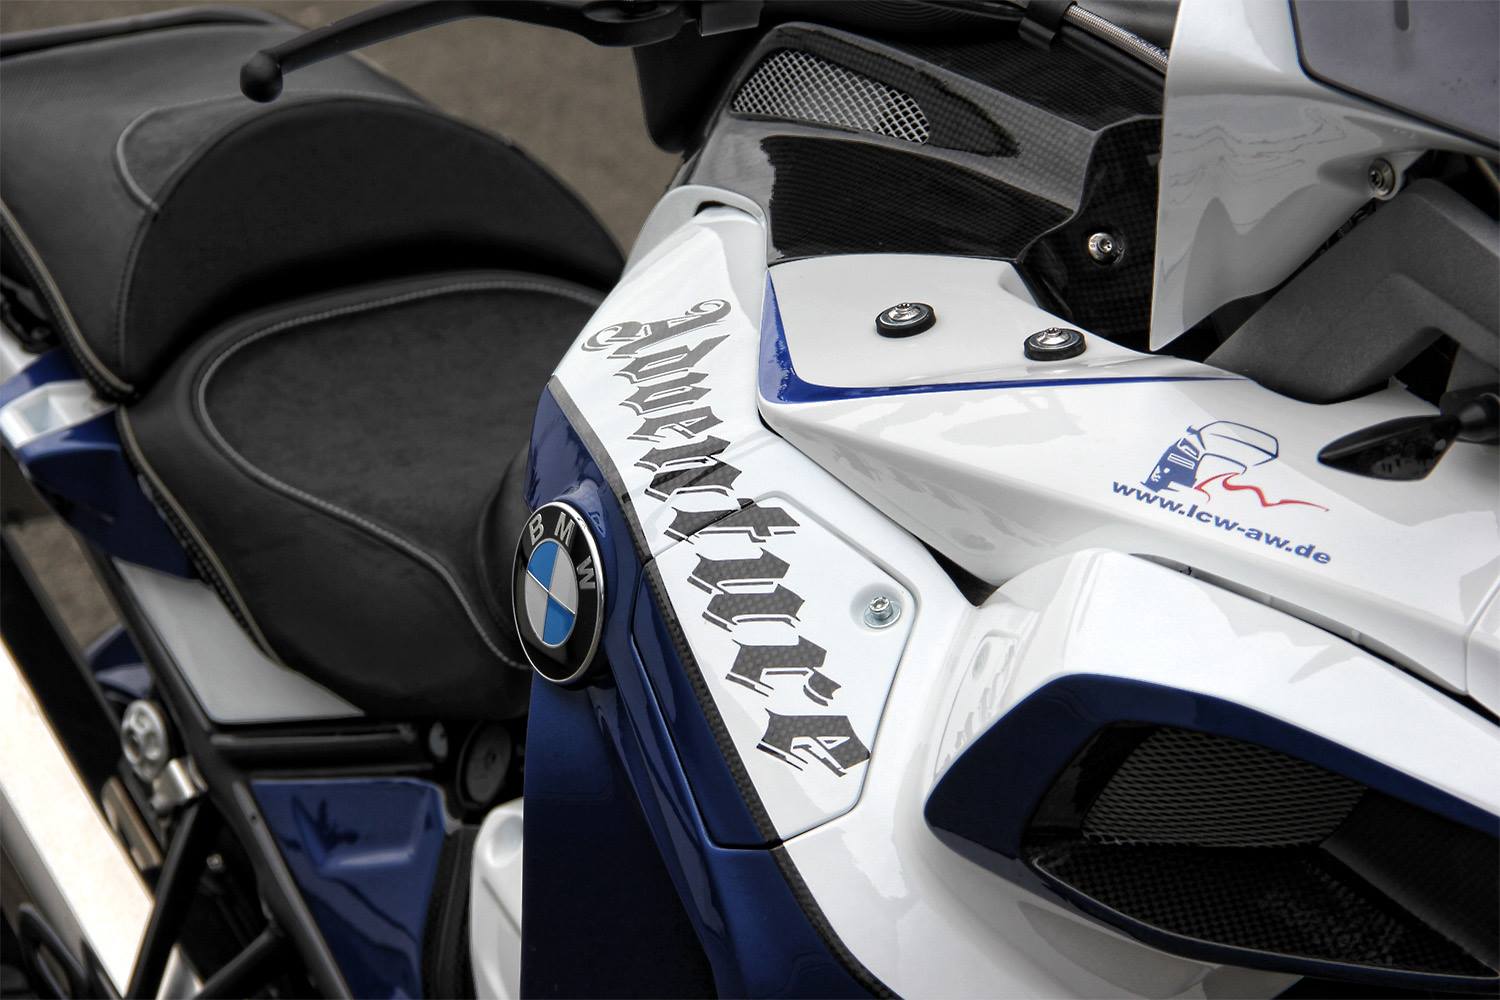 can-you-spot-the-bmw-r1200gs-adventure-in-these-photos_2-autonovosti.me-1